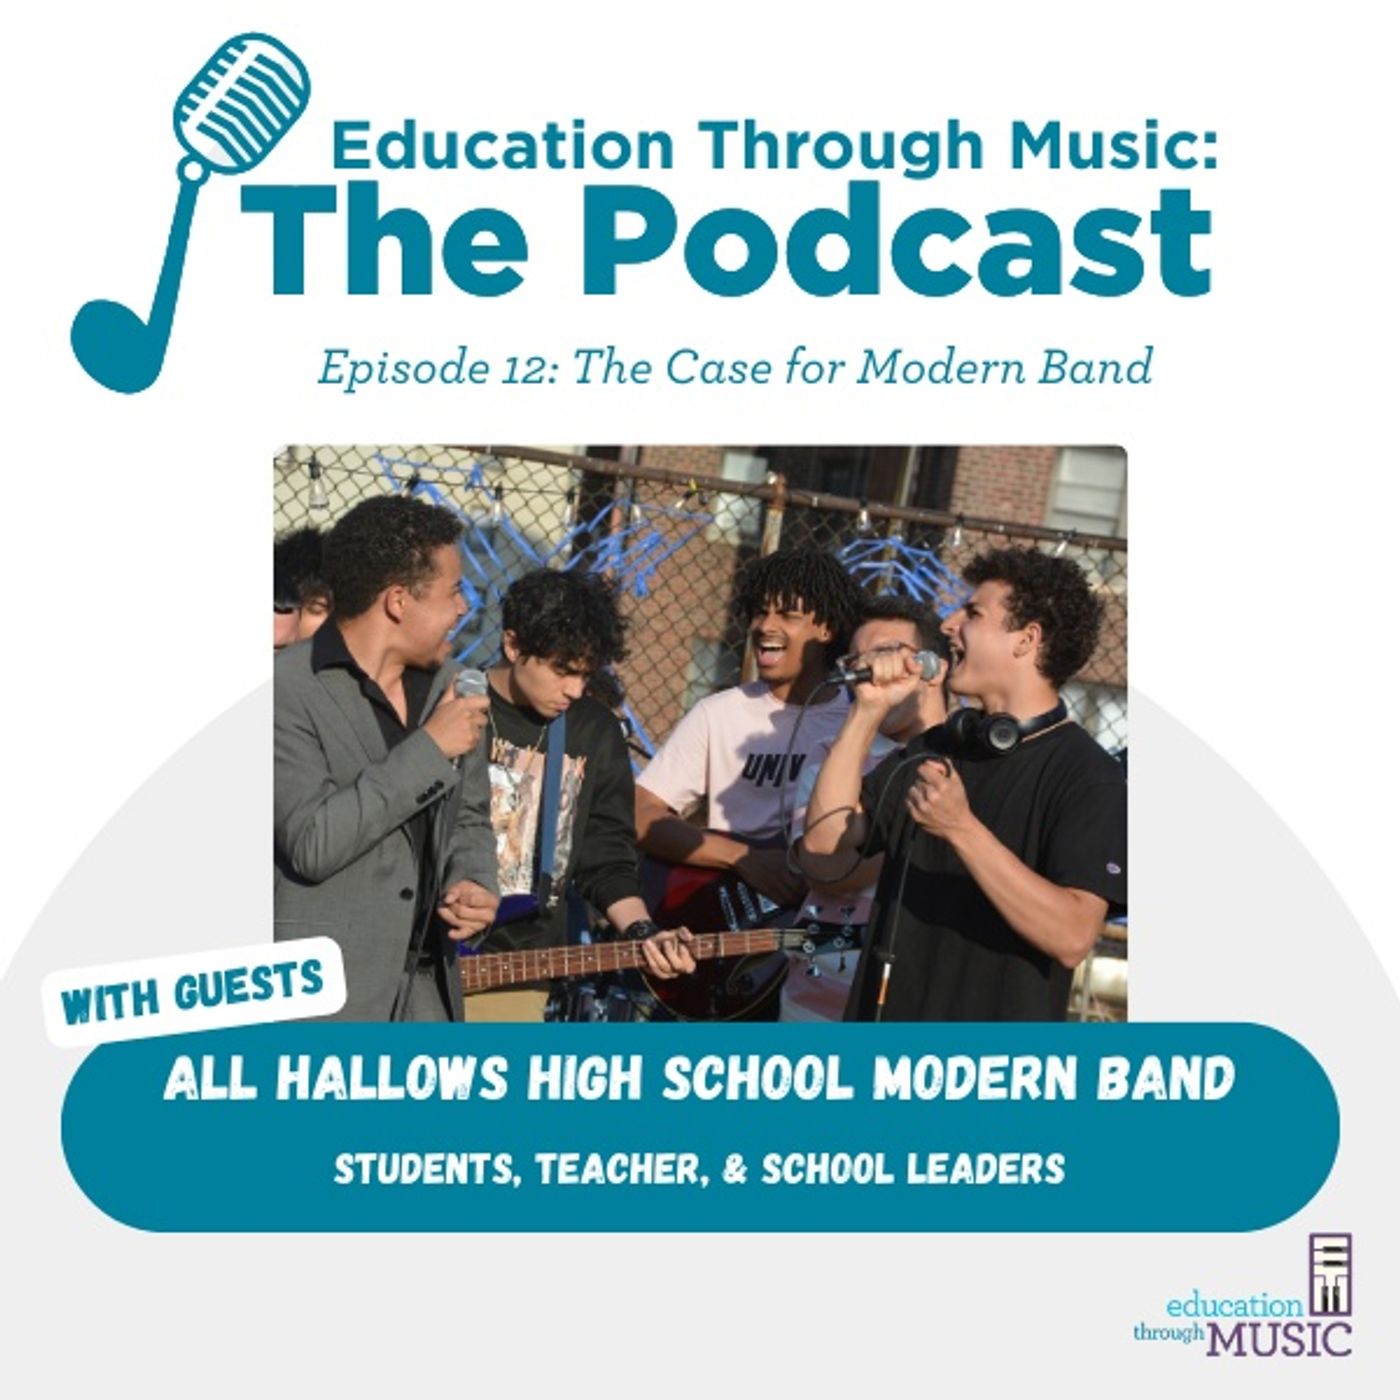 Episode 12: The Case for Modern Band